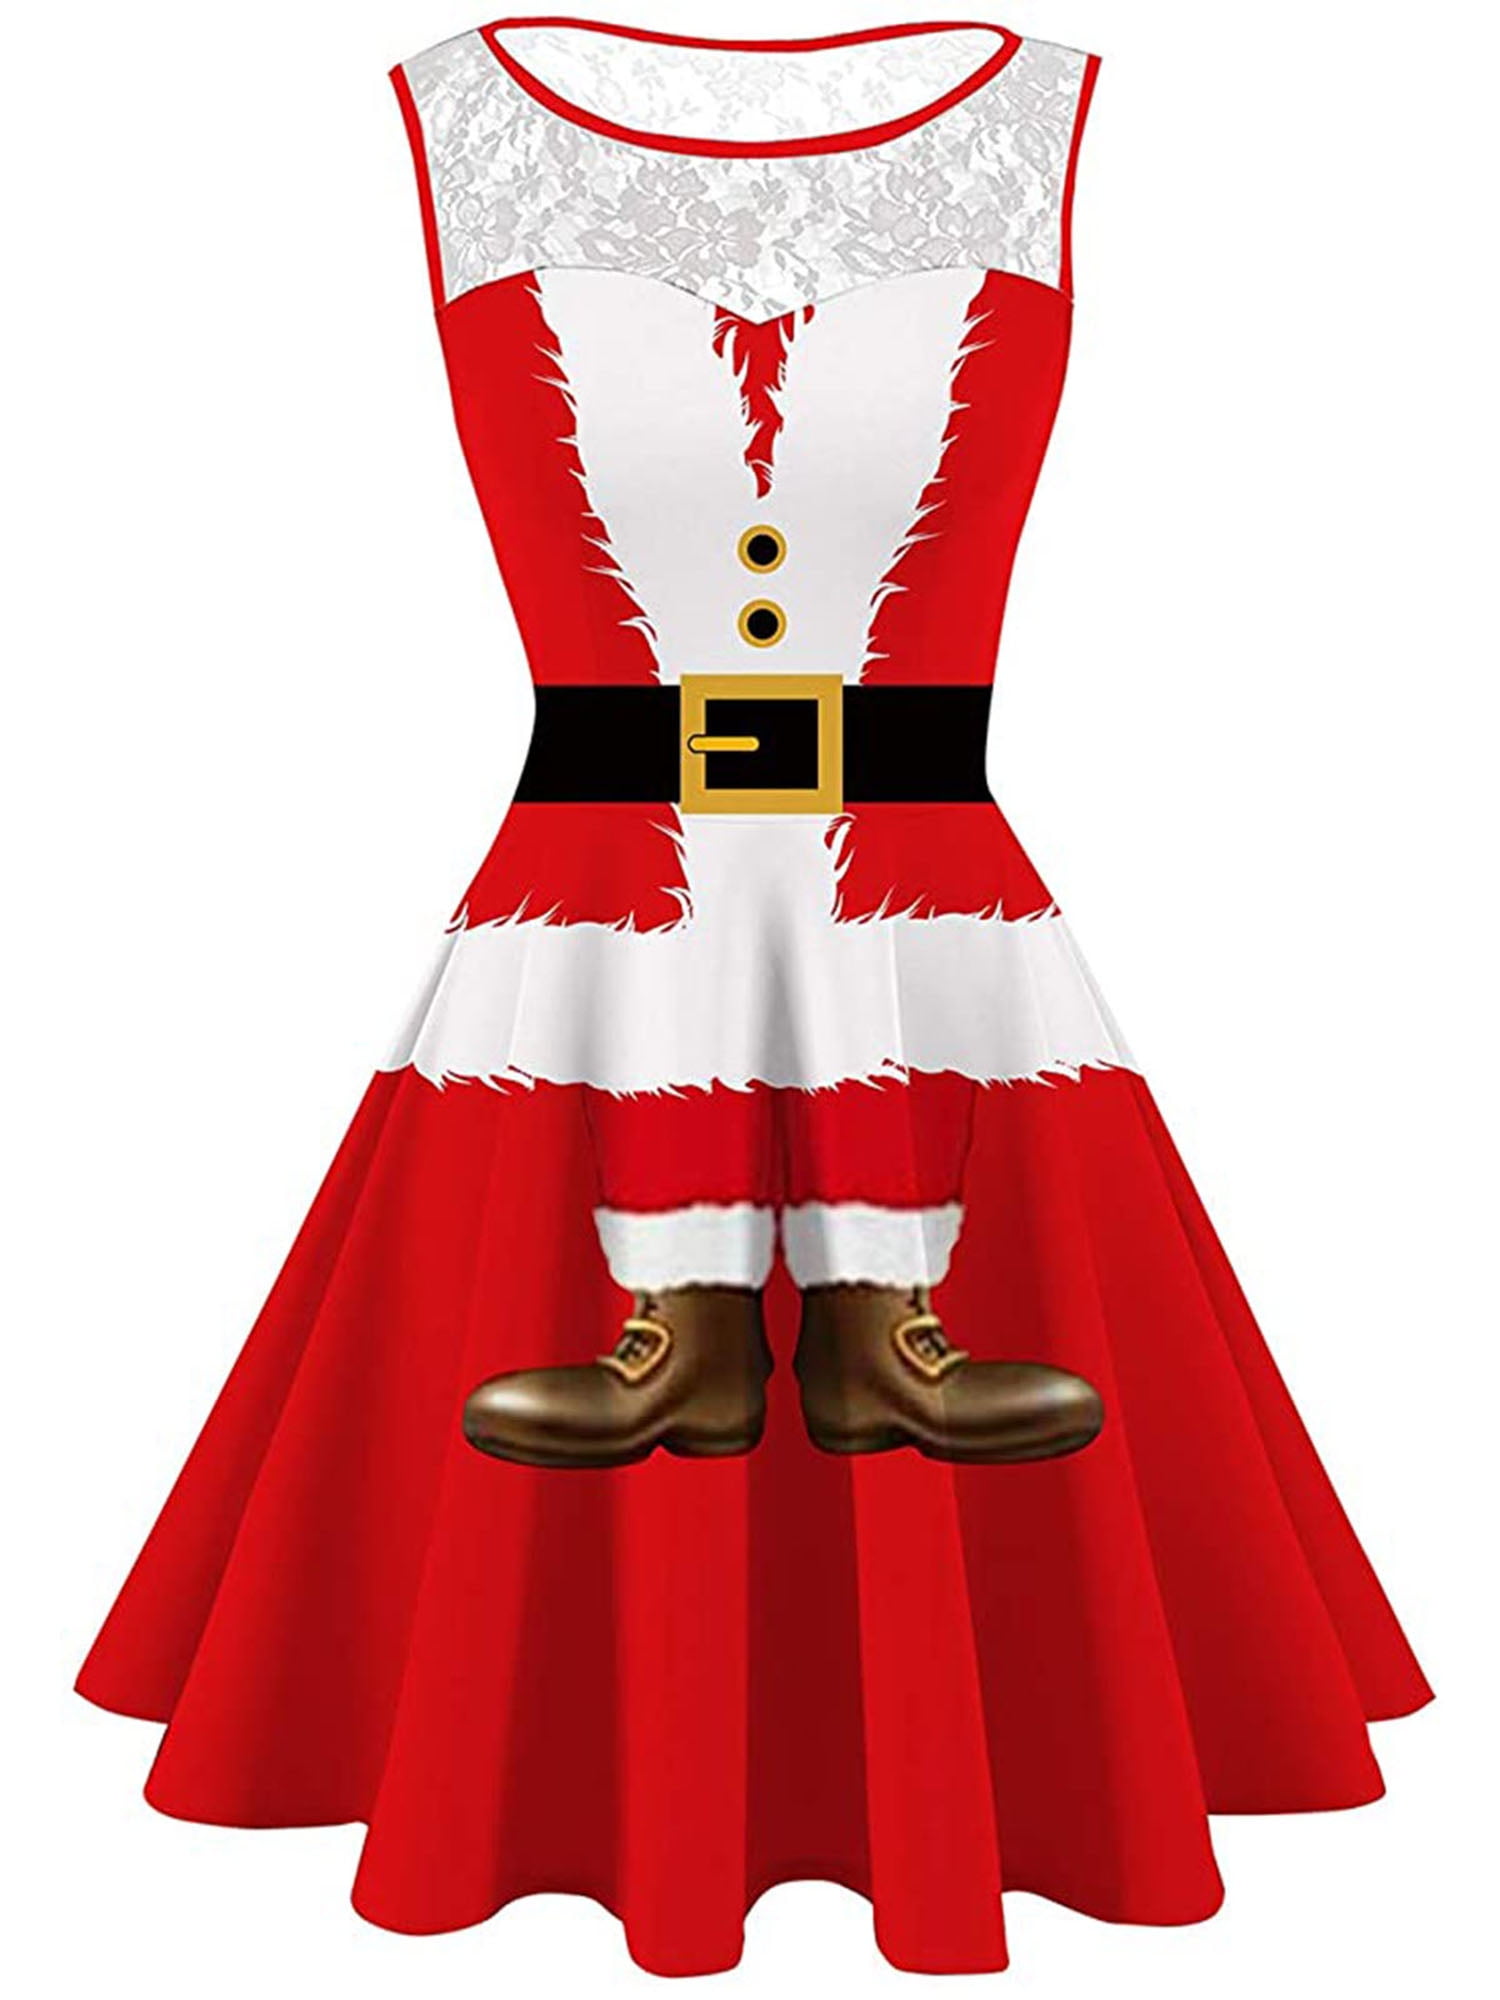 Shop Online Red and White Snowman Christmas Party Dress for Toddler Girls